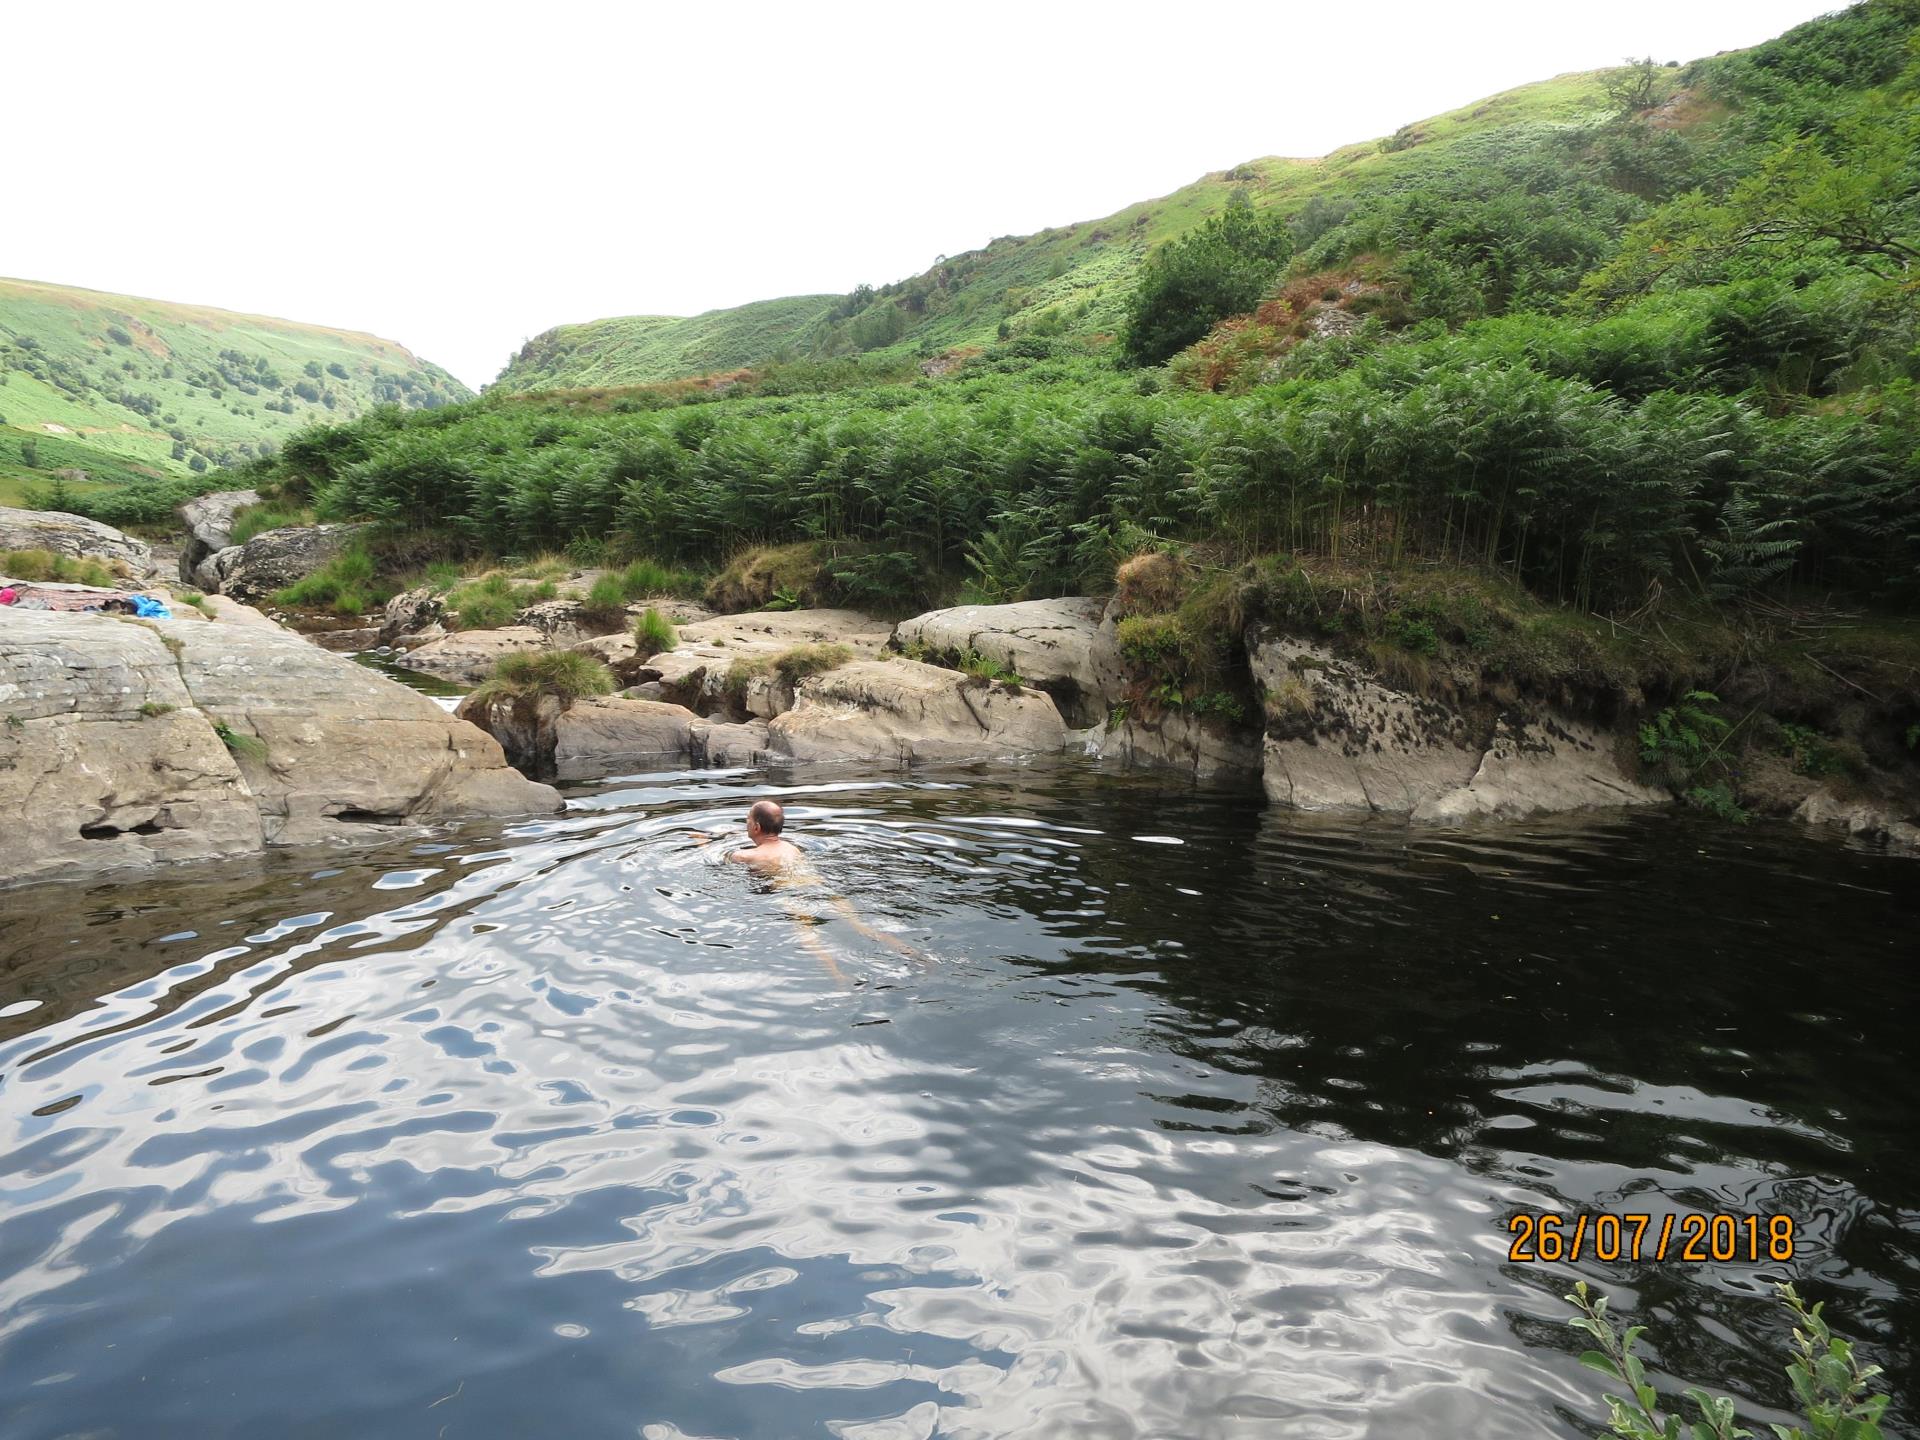 Wild swimming at Wolf's leap